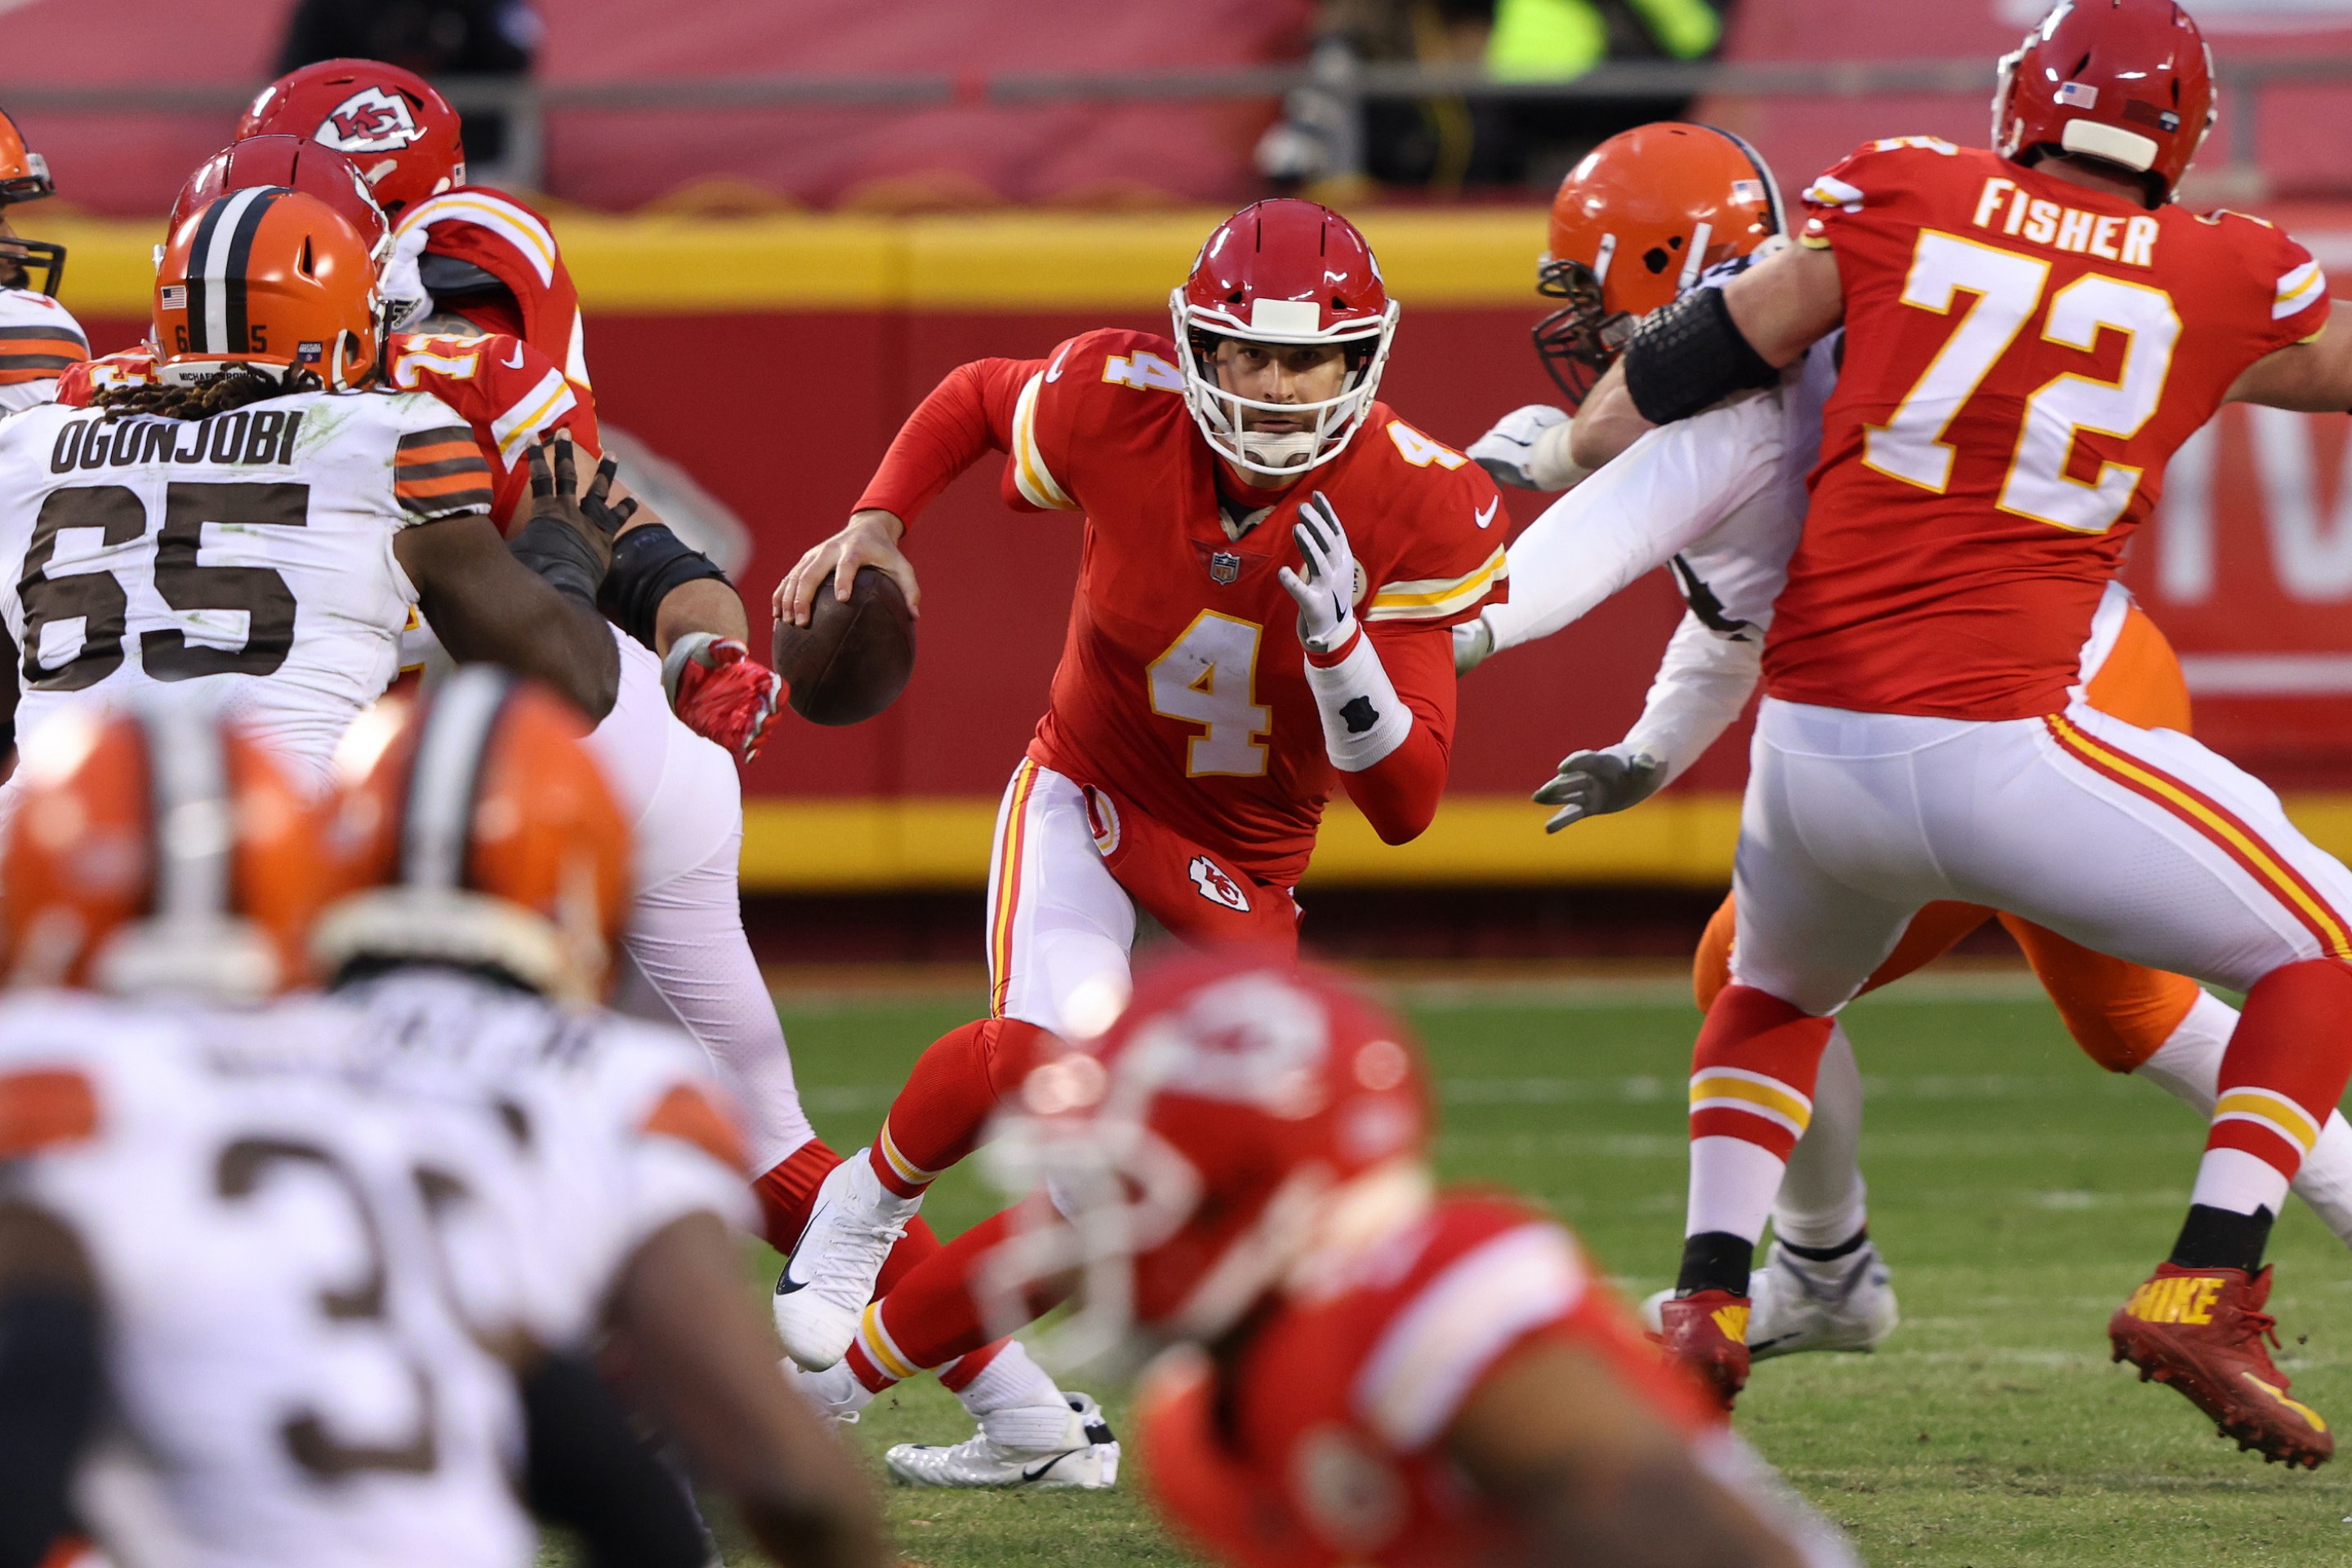 Quarterback Chad Henne #4 of the Kansas City Chiefs scrambles against the defense of the Cleveland Browns late in the fourth quarter of the AFC Divisional Playoff game at Arrowhead Stadium on January 17, 2021 in Kansas City, Missouri.